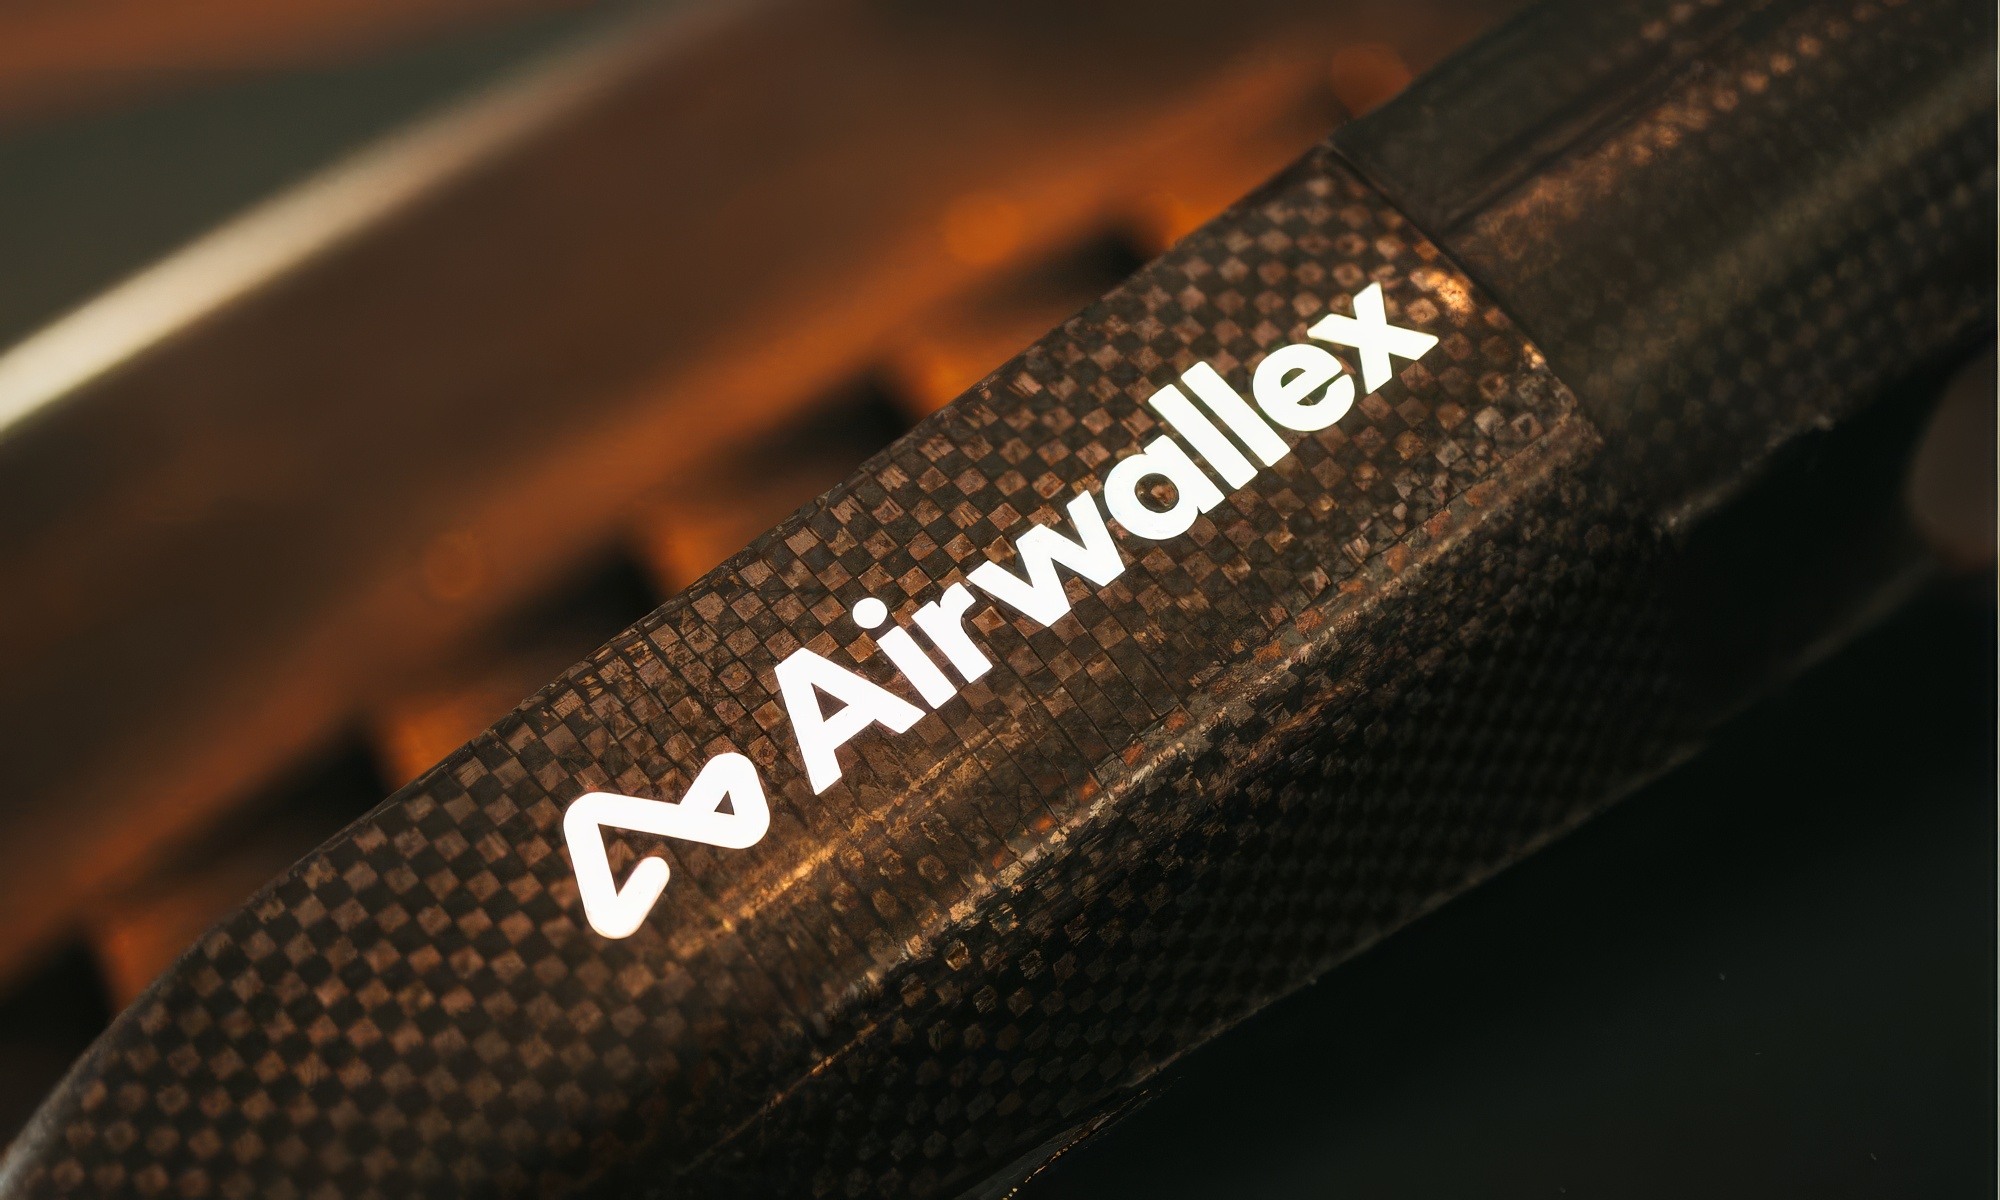 Airwallex Appoints Right Formula to activate F1 Partnership